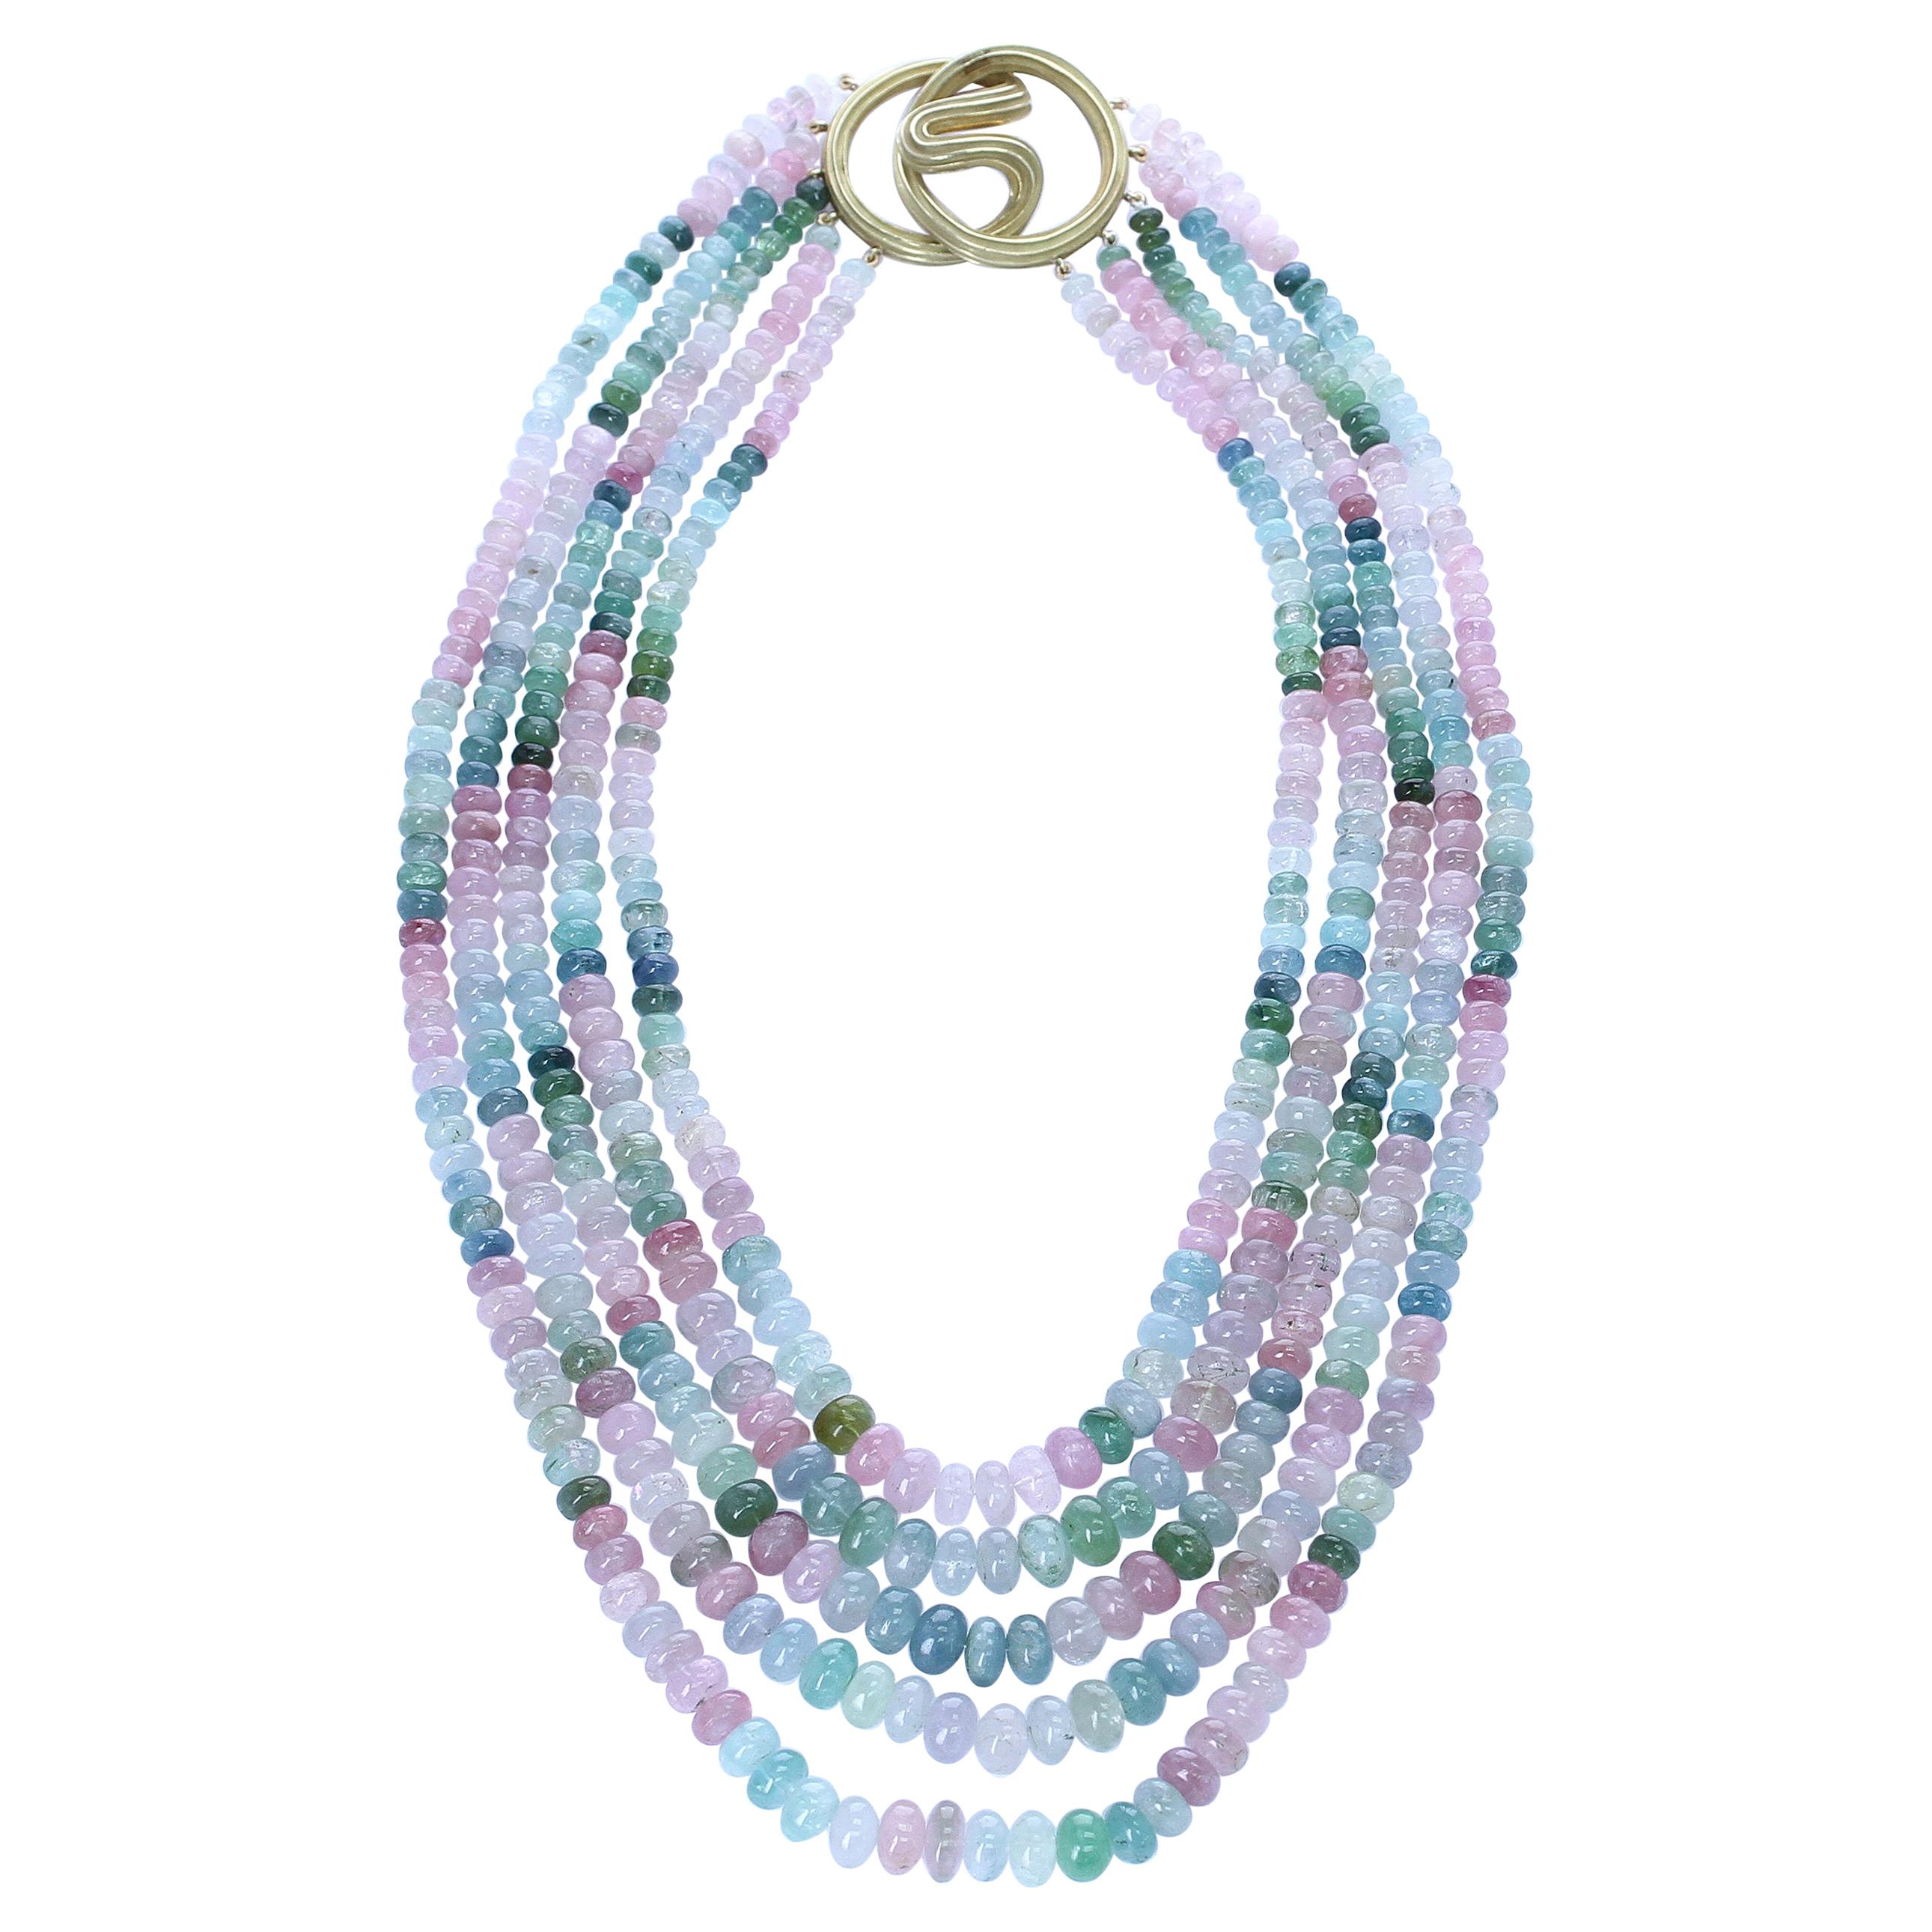 Natural Plain Multi-Tourmaline Bead Necklace, Clasp by Christopher Walling For Sale